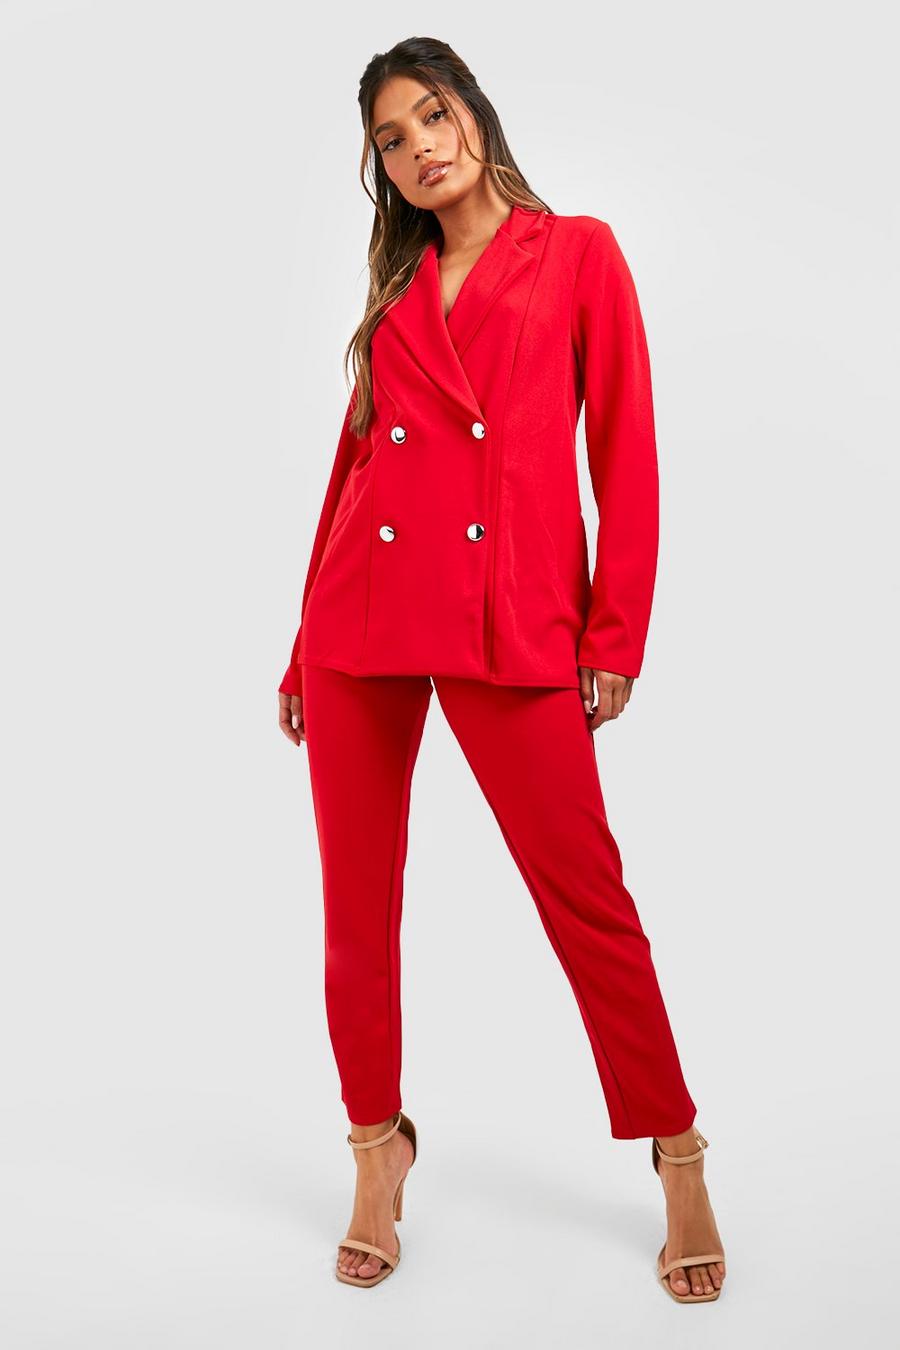 Double Breasted Blazer And Pants Suit Set | boohoo